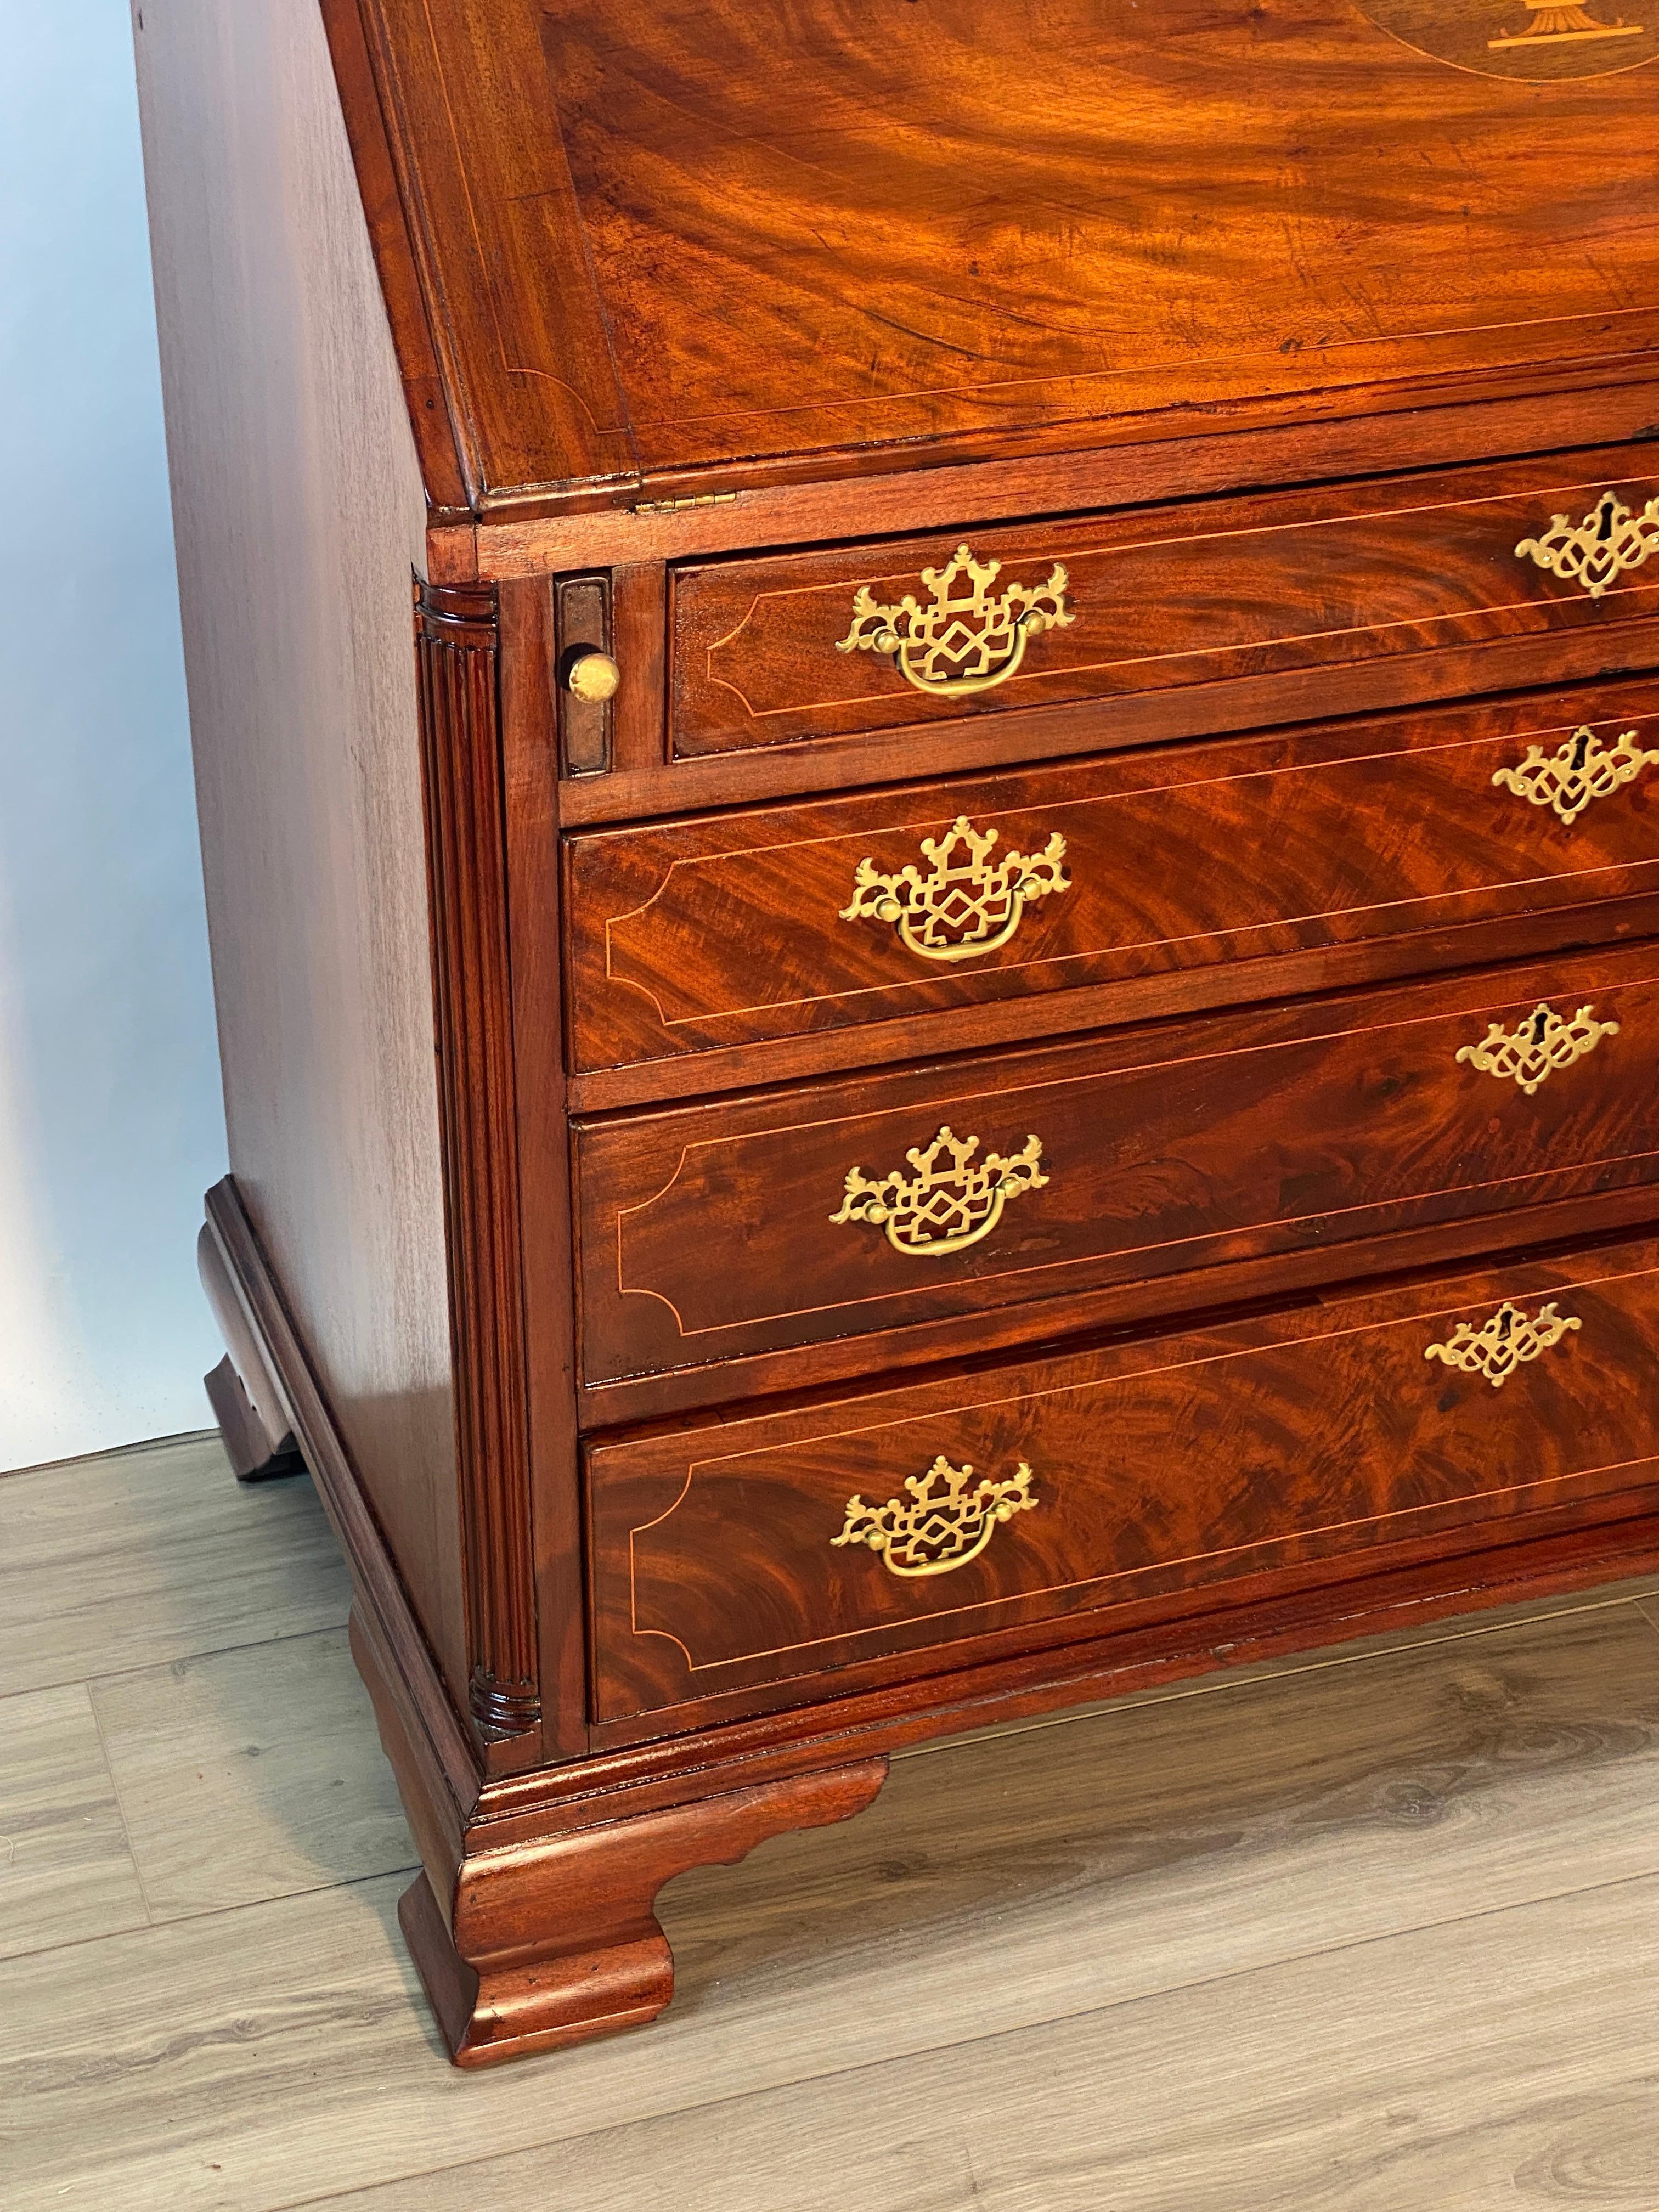 Impressive late 18th century Mahogany American Chippendale slant front desk acquired from a historical property in Washington D.C. 
The interior is fitted with pigeonholes and drawers. One centre door opens to reveal two additional drawers and one